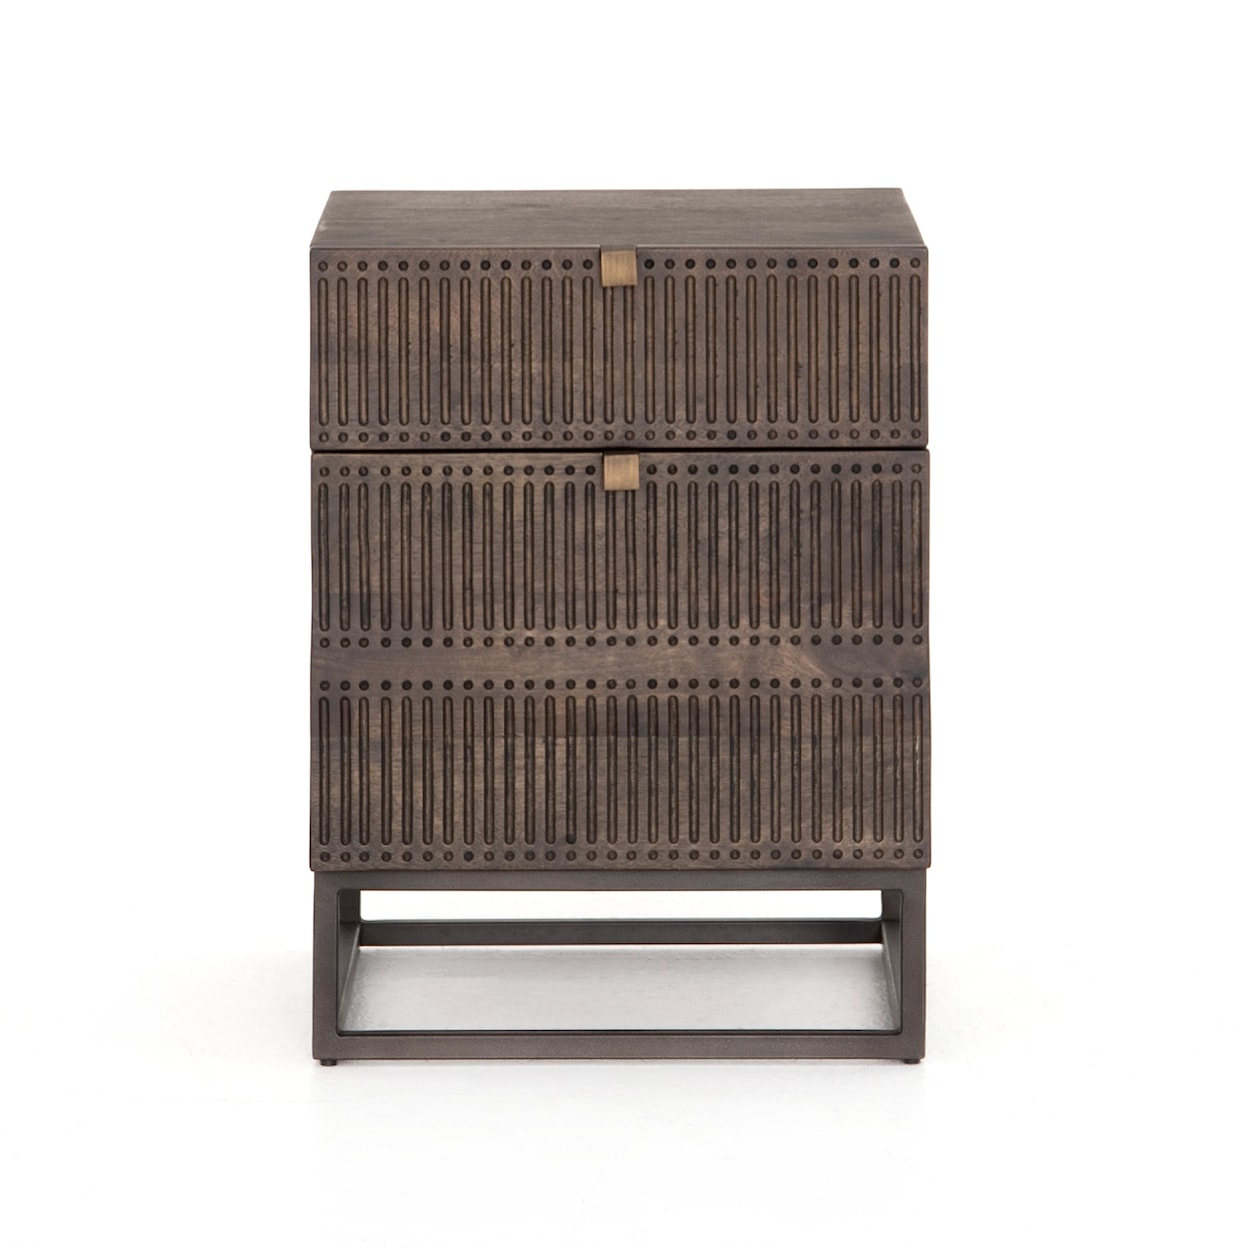 Four Hands Kelby Filing Cabinet